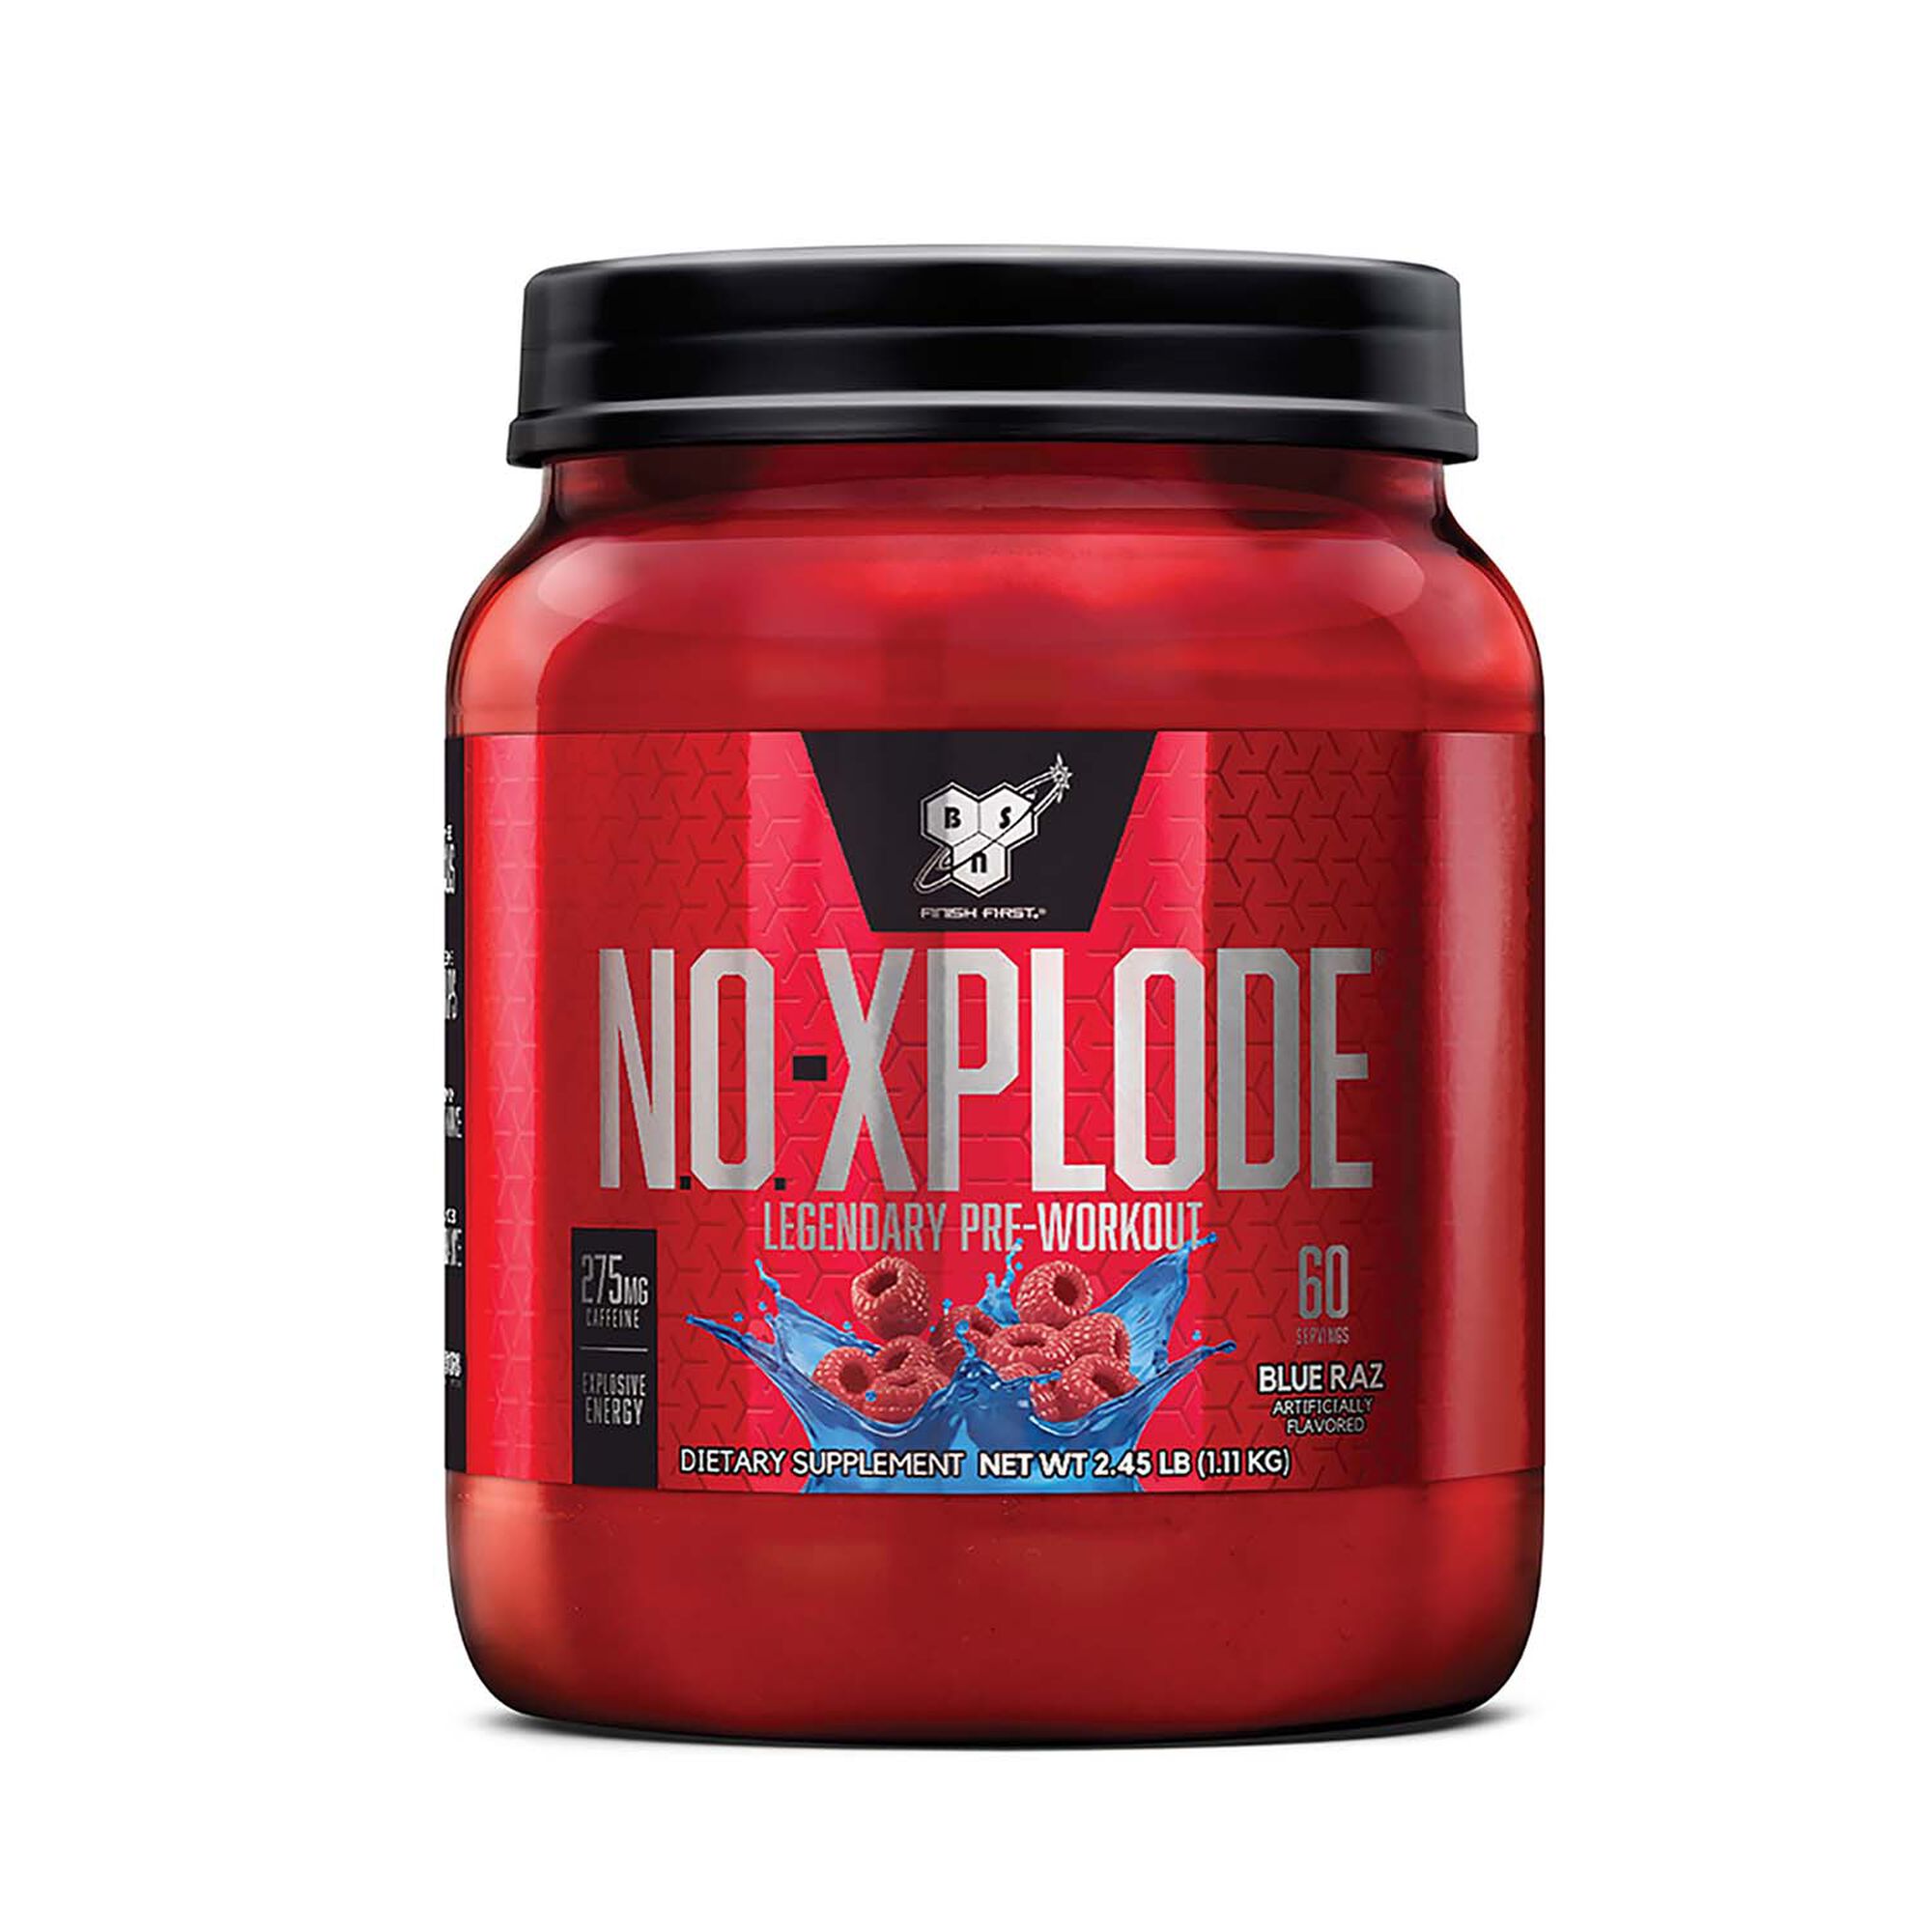 59 10 Minute Xplode pre workout for Women